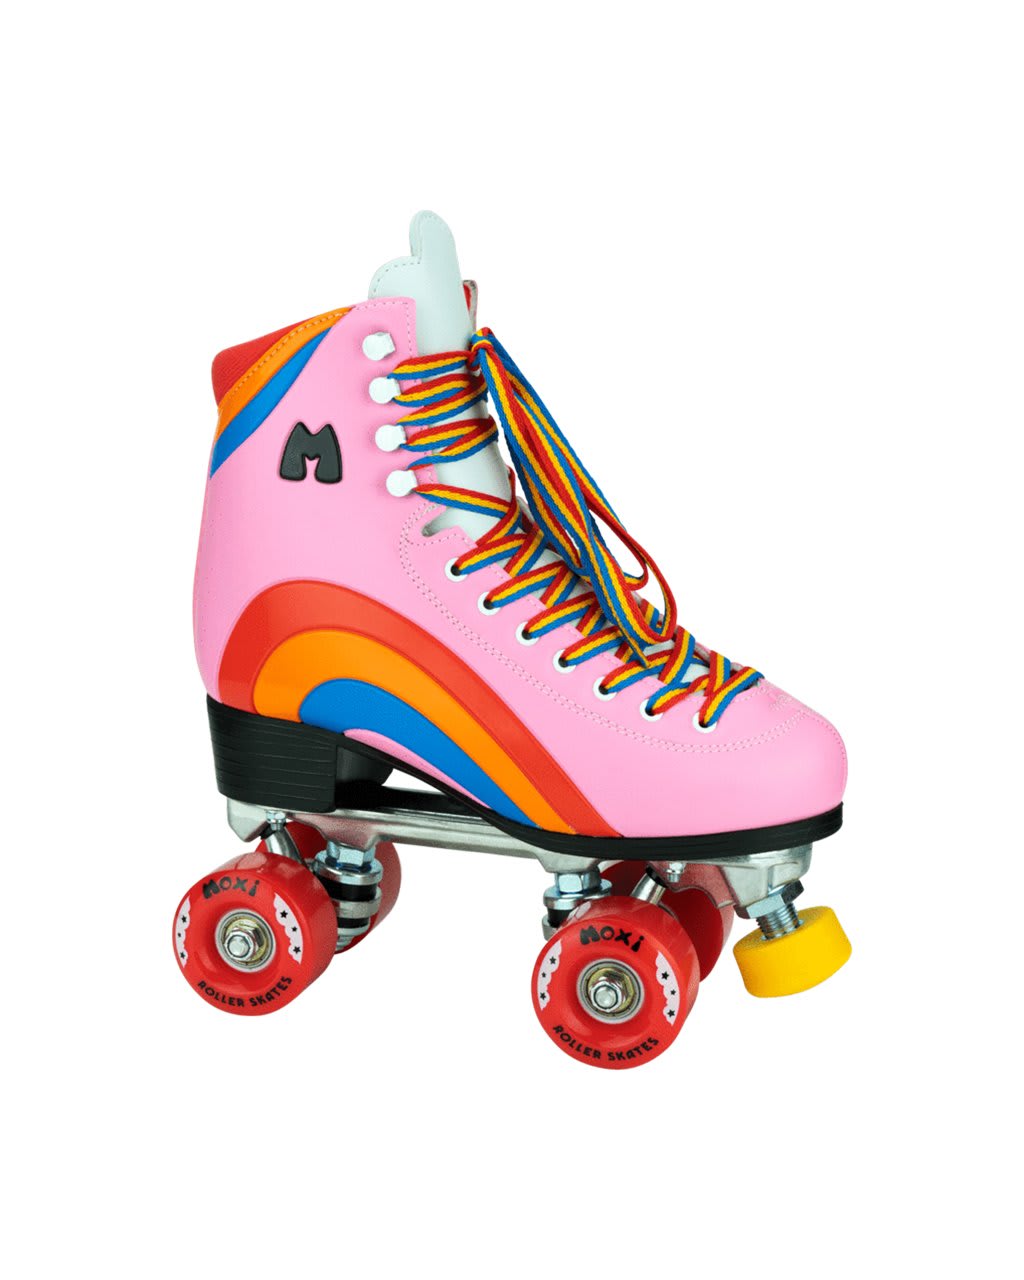 PHSDA Womens Roller Skates PU Leather High-top Roller Skates Four-Wheel Roller Skates Shiny Roller Skates for Unisex Kids and Adults